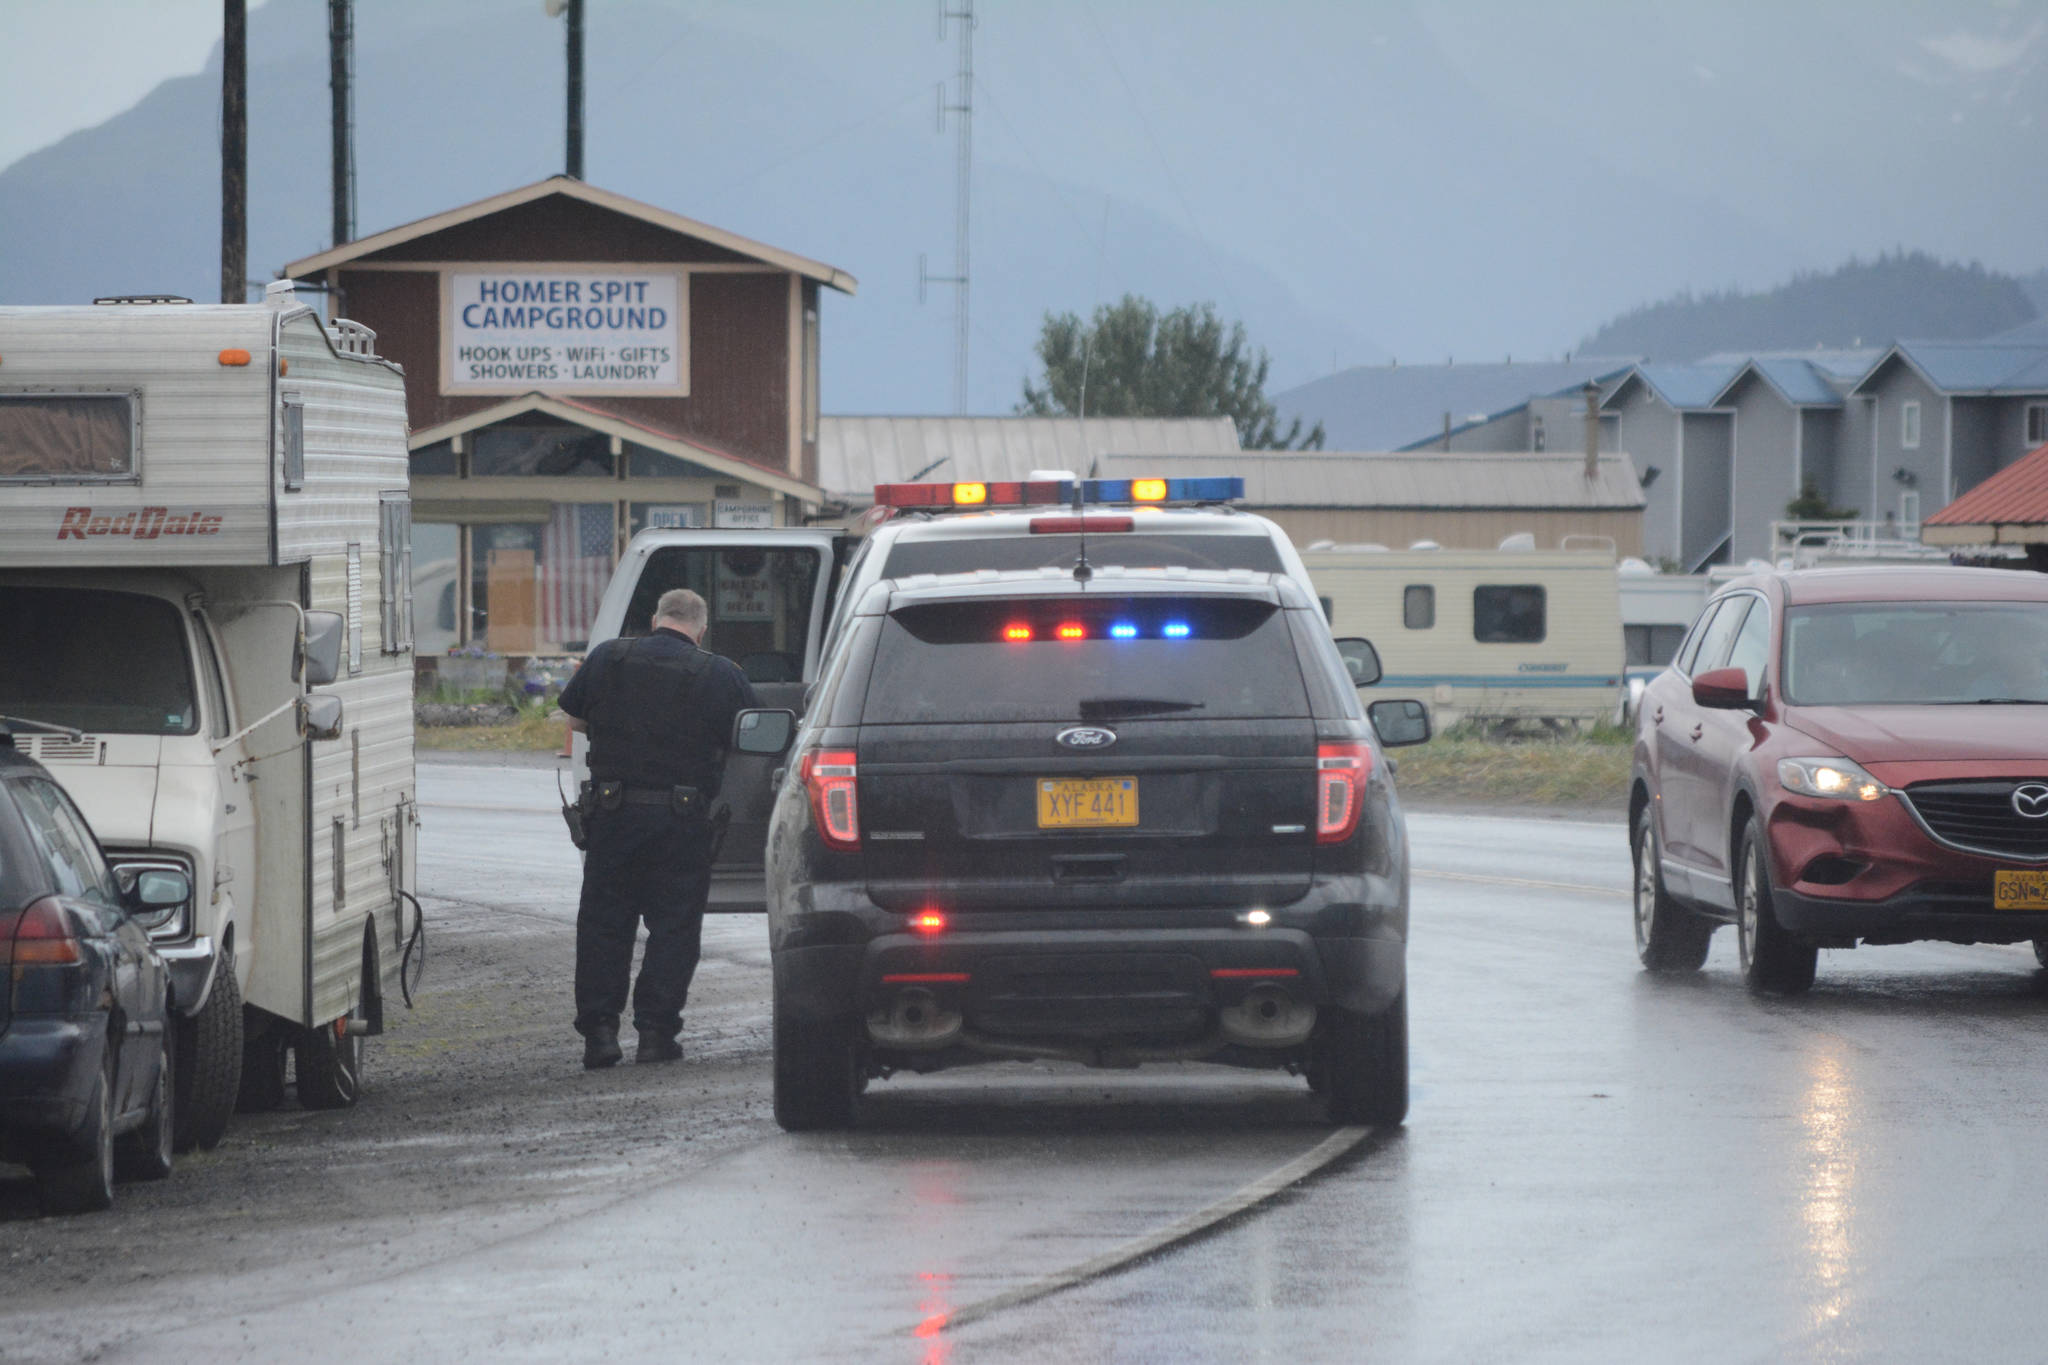 Homer Police Officer Ed Stading puts a 27-year-old California man into a patrol vehicle about 12:30 p.m. Wednesday on the Homer Spit near Fish Dock Road. Police later released the man at the scene. (Photo by Michael Armstrong, Homer News)